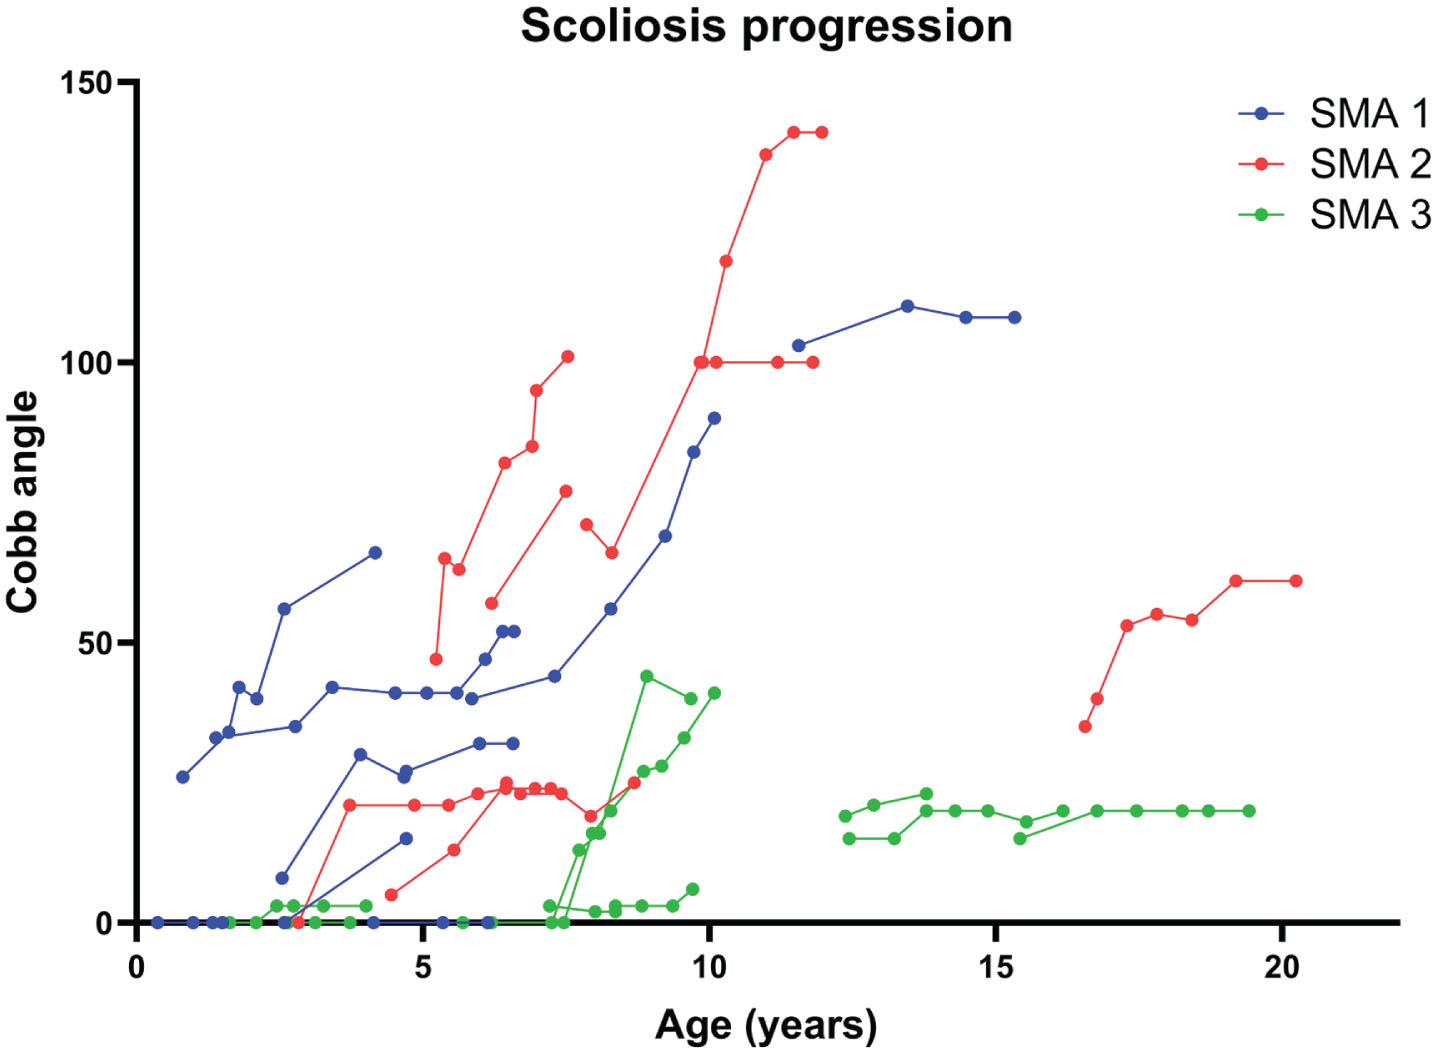 Cobb angle progression in different SMA types. Scoliosis progressed in all SMA subtypes. The fastest rates of scoliosis progression are observed in patients with SMA1 and SMA2.